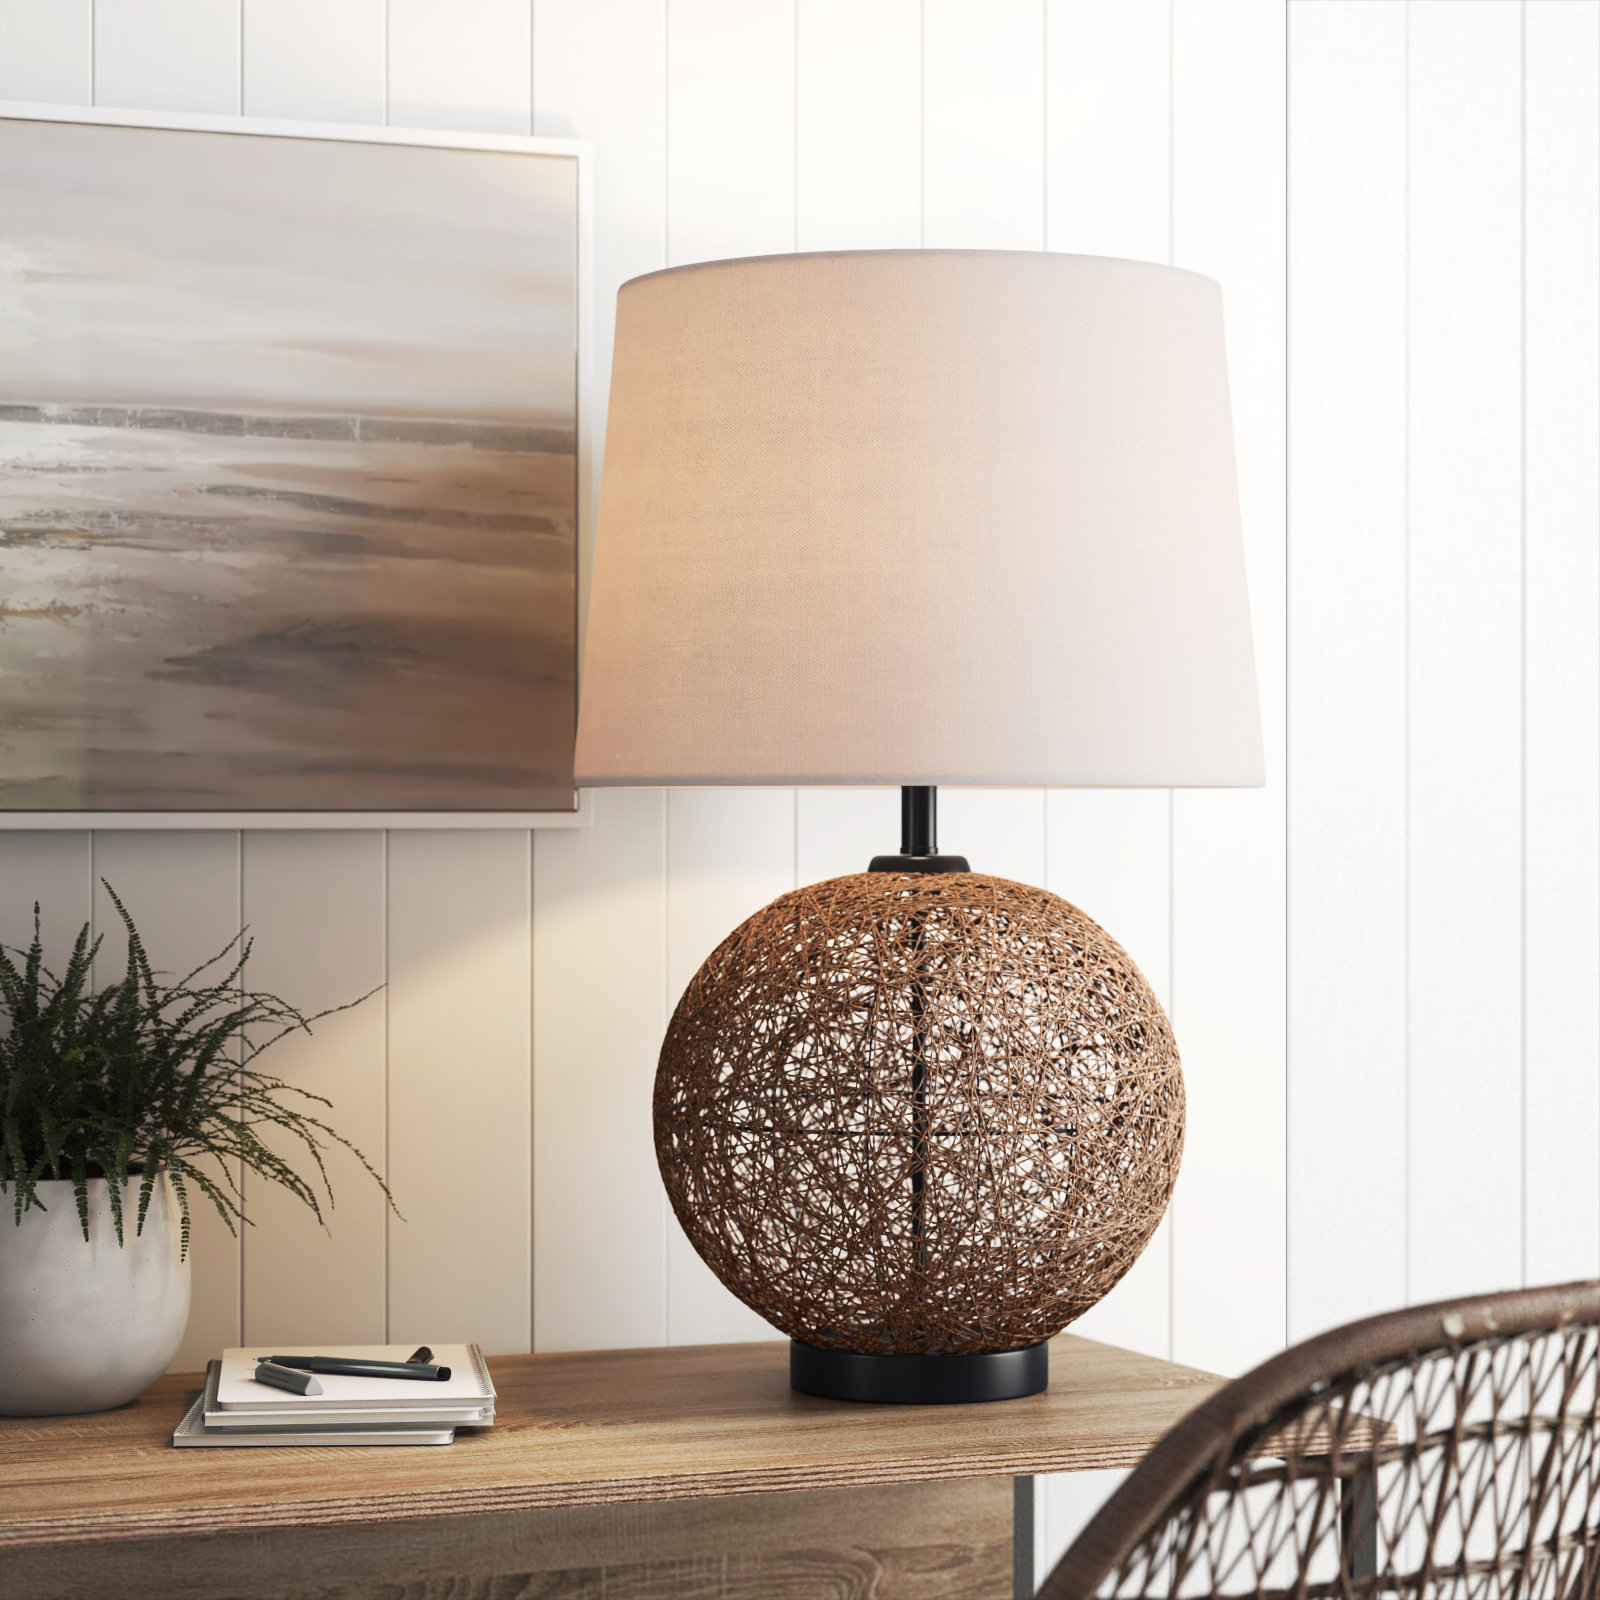 Light Up Your Life: Elegant Small Brass Table Lamp with Soft Cream Fabric  Shade